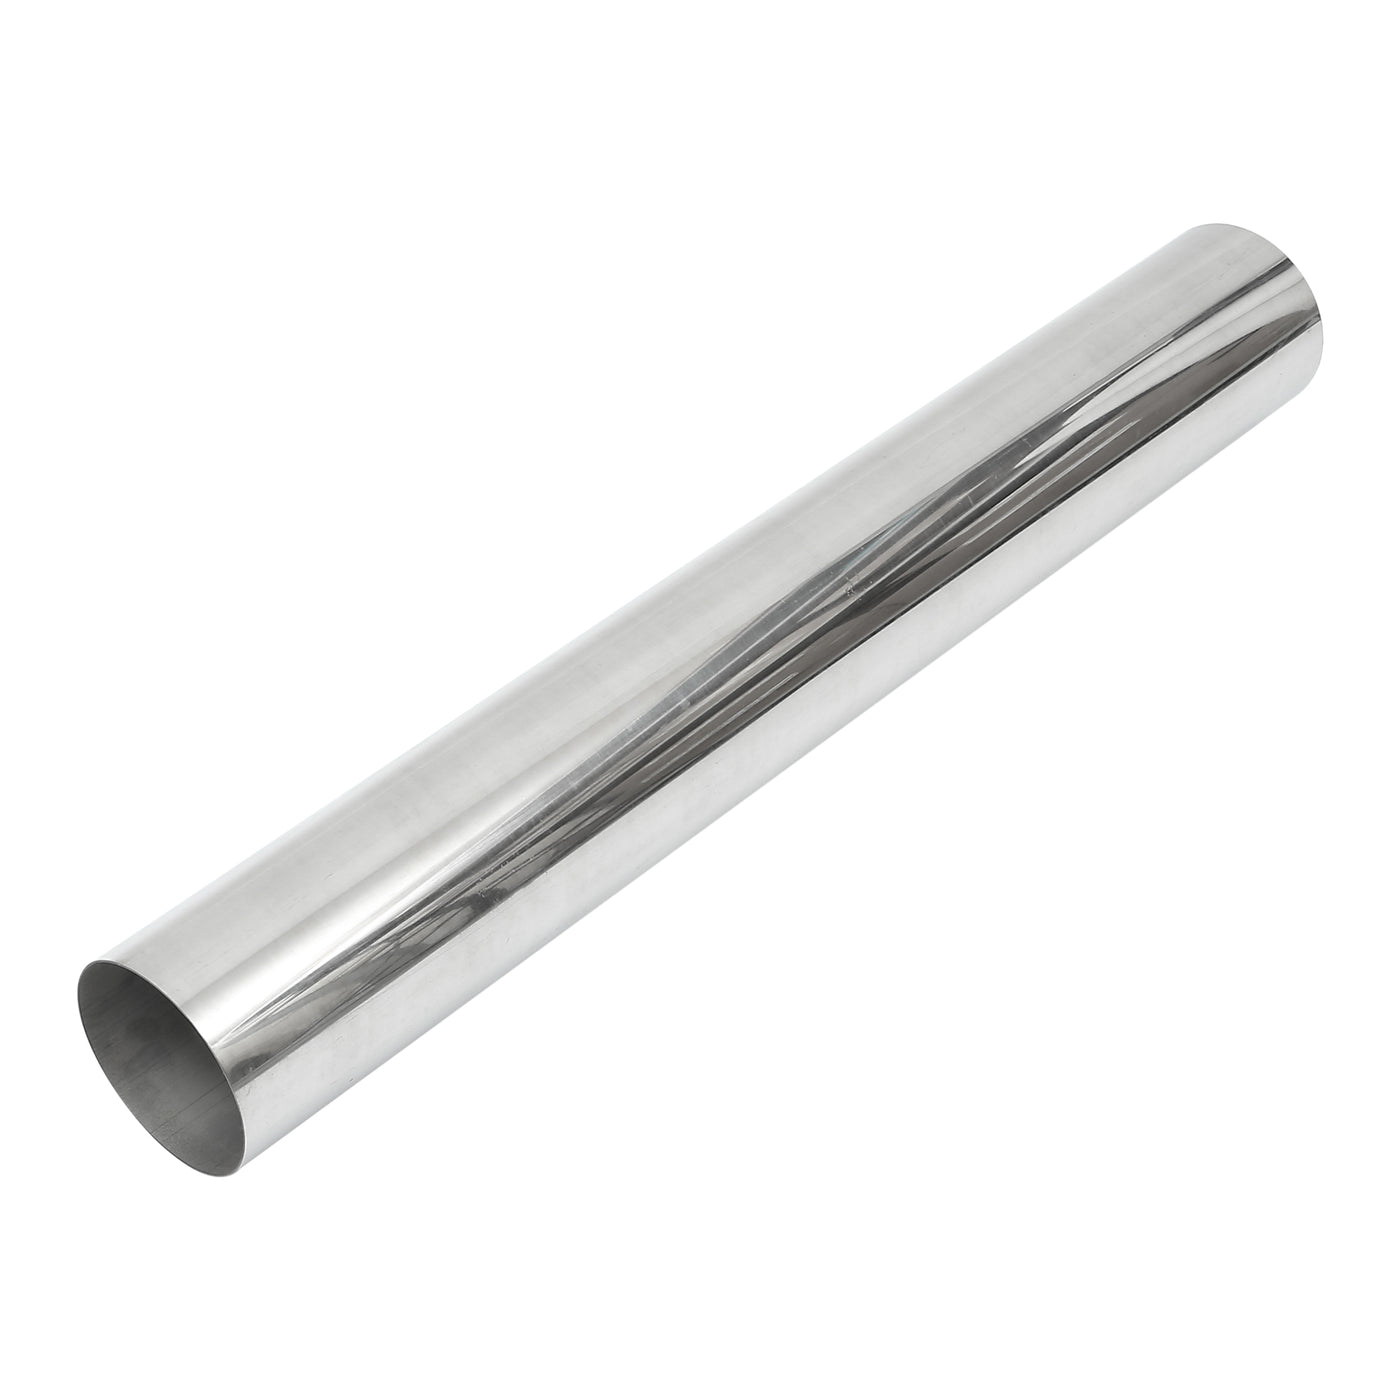 A ABSOPRO Car Mandrel Exhaust Pipe Tube Durable 35" Length 5' OD Straight Exhaust Tube DIY Custom 0 Degree Modified Piping T304 Stainless Steel Silver Tone